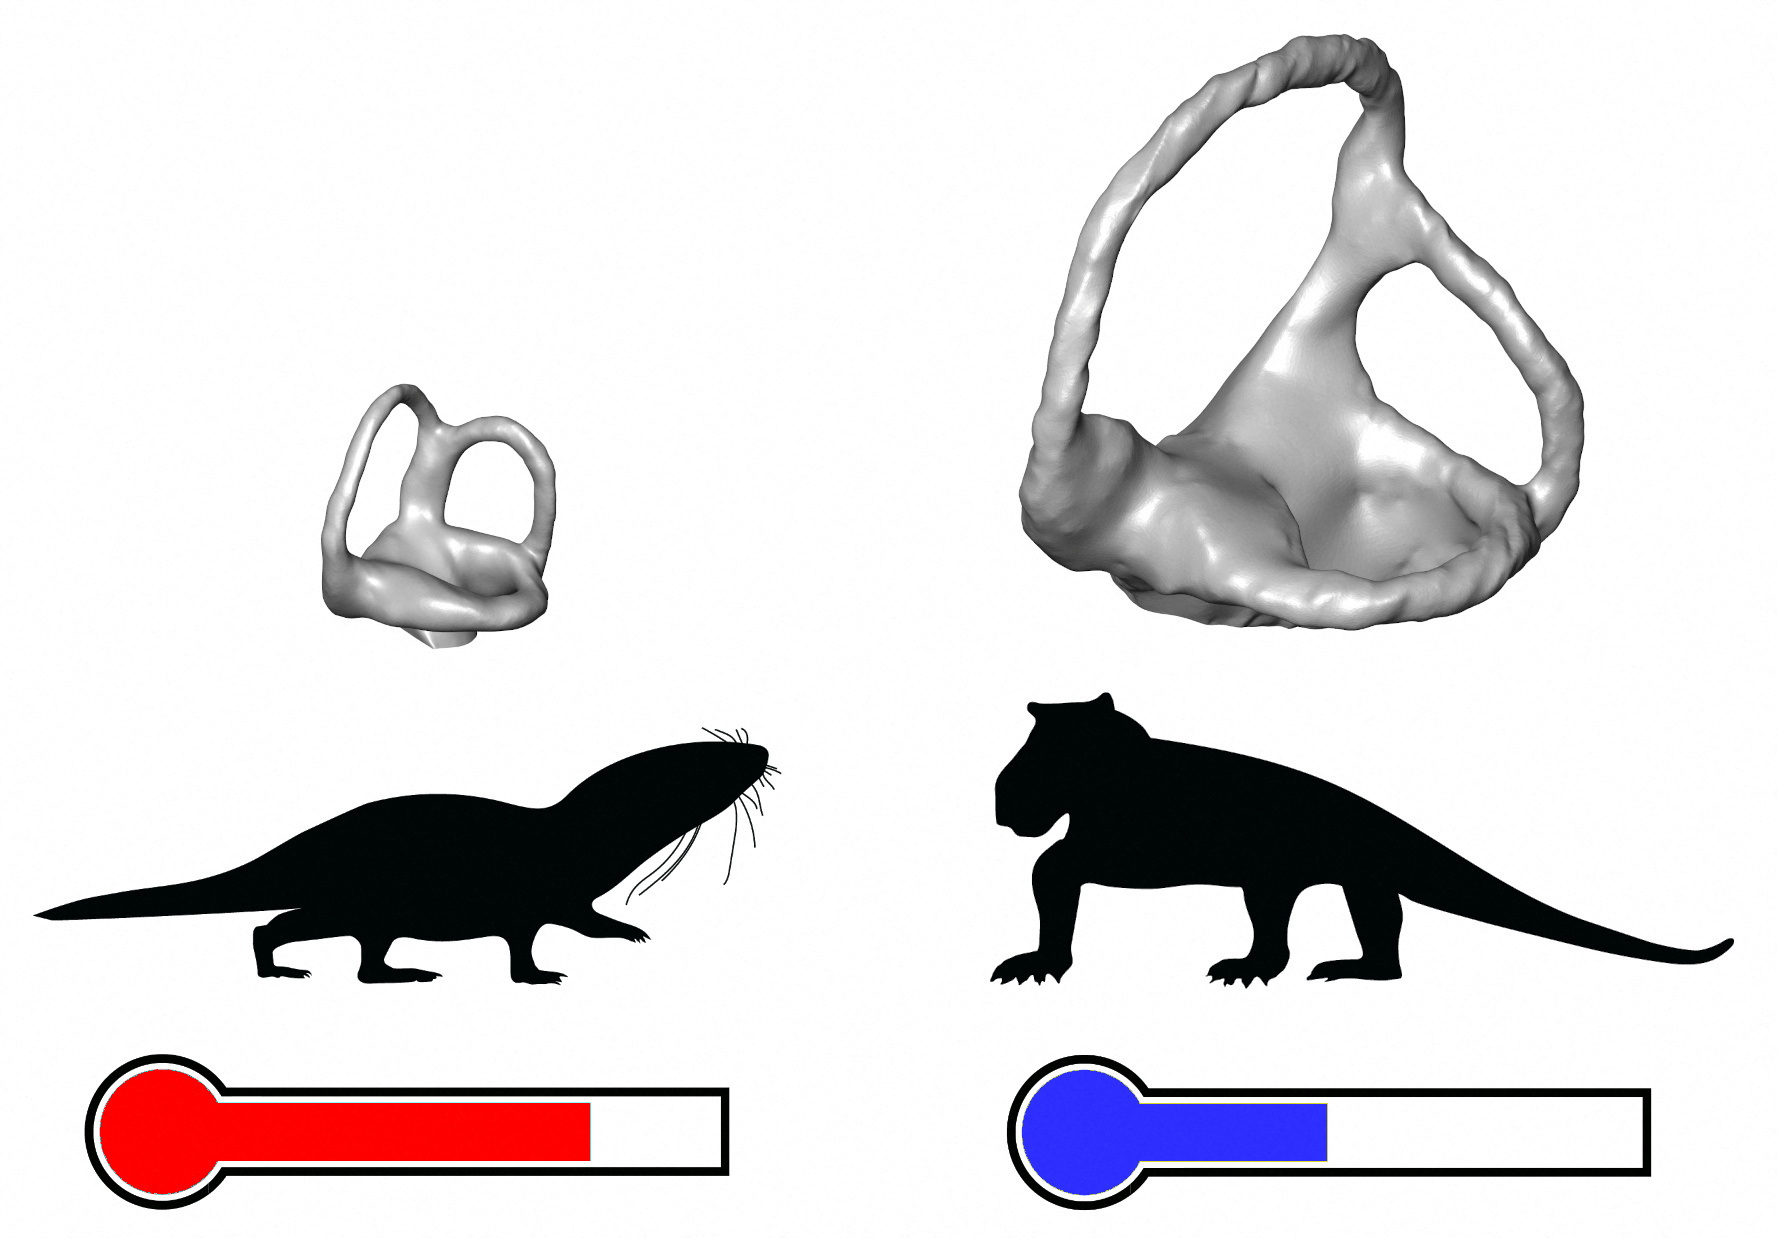 Size differences between inner ears of warm-blooded mammaliamorphs and cold-blooded, earlier synapsids